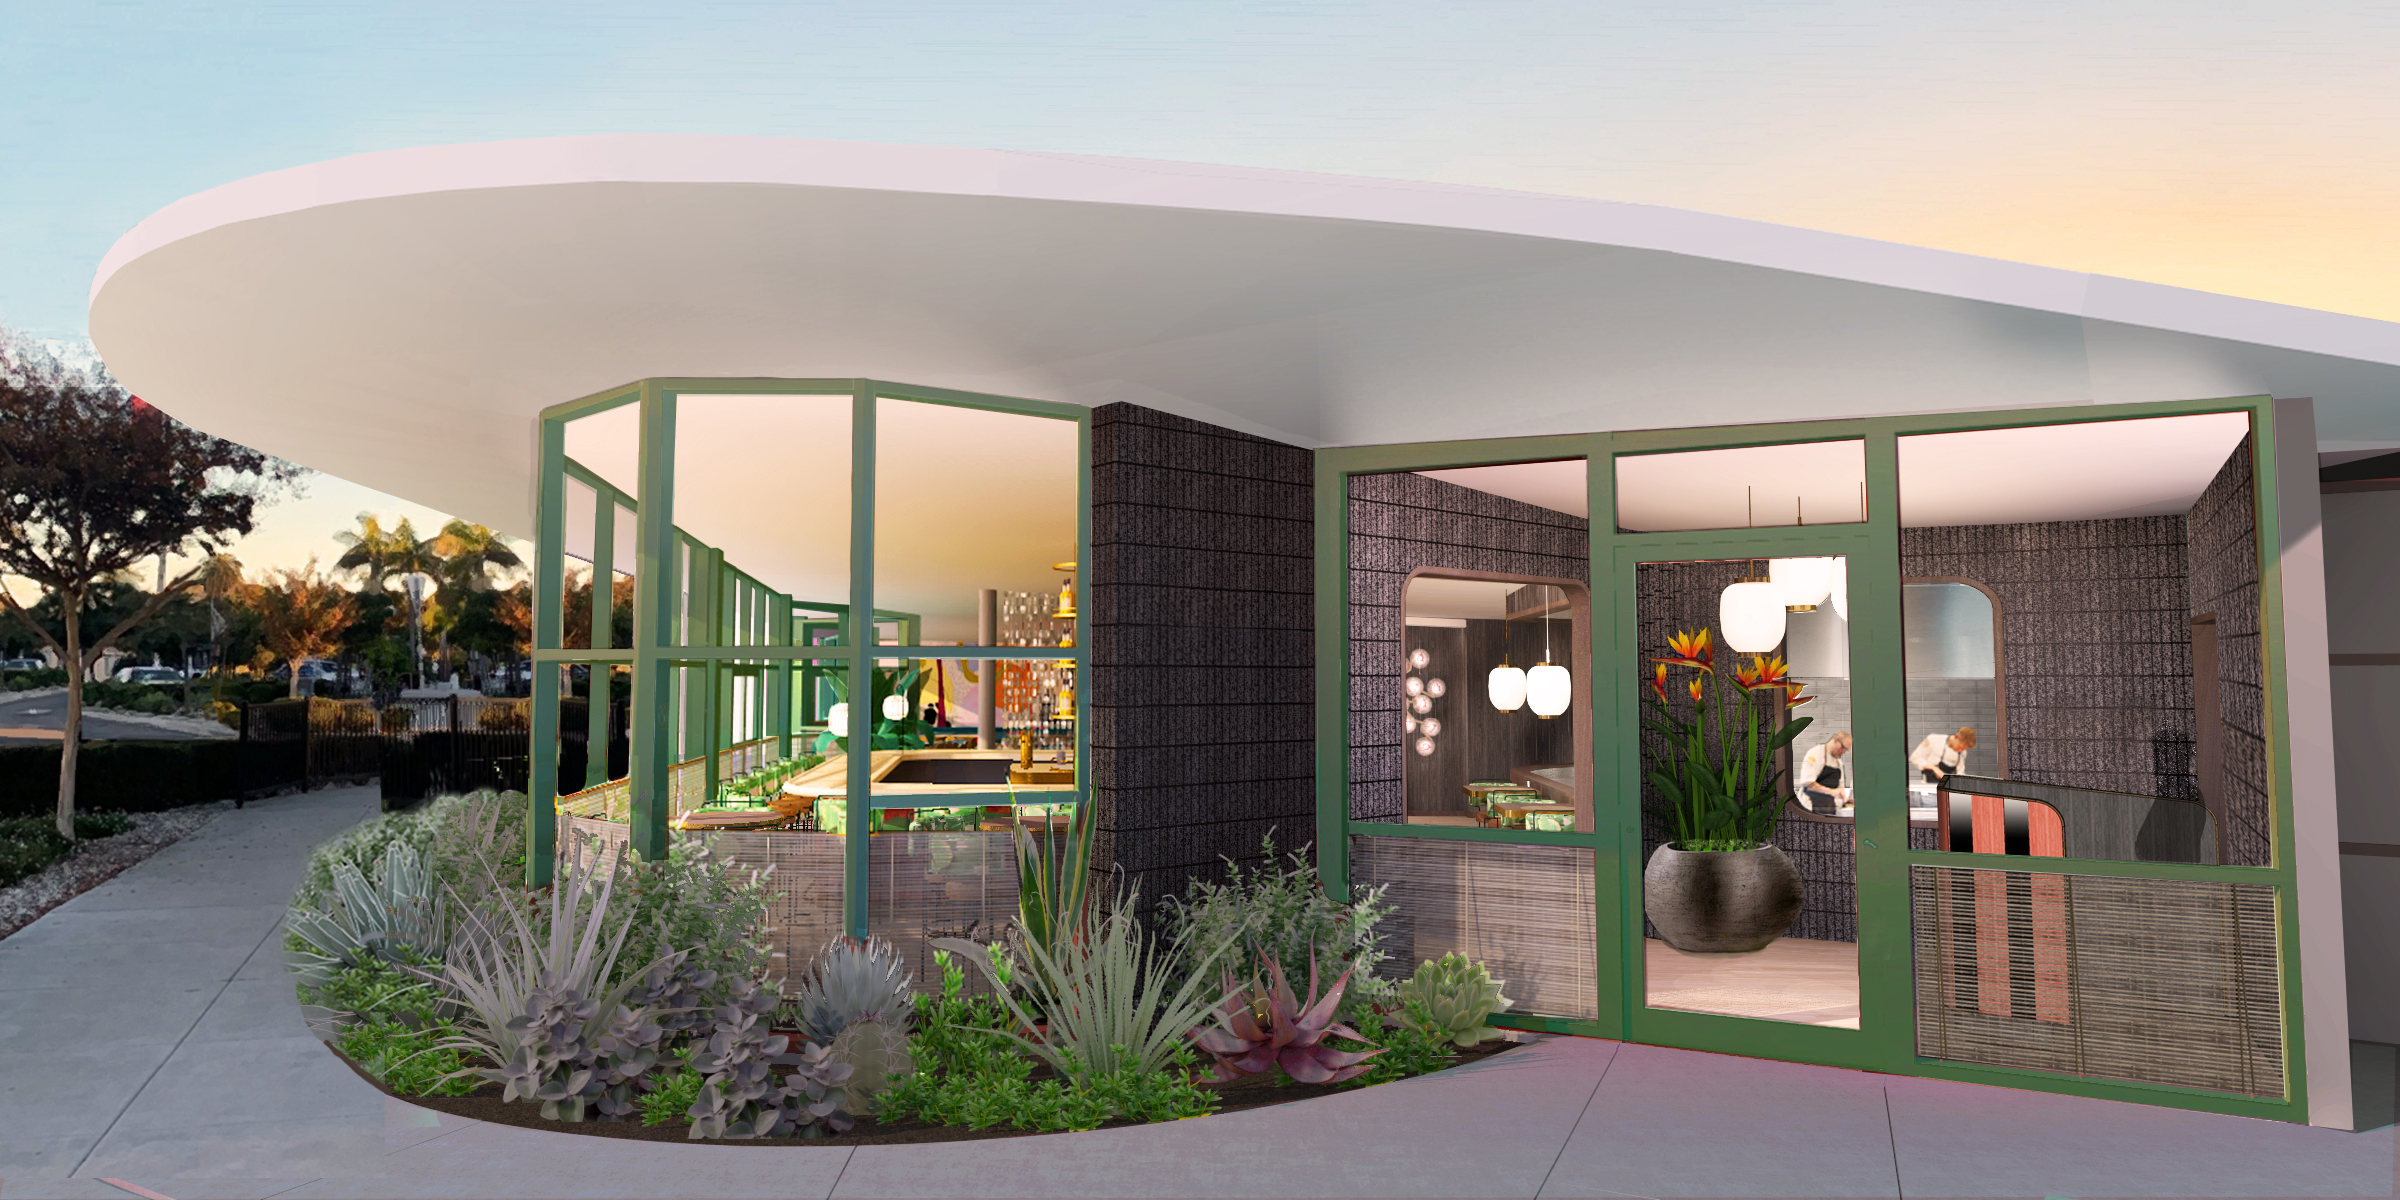 A rendering of a restaurant exterior with a curved roof and all-glass walls.